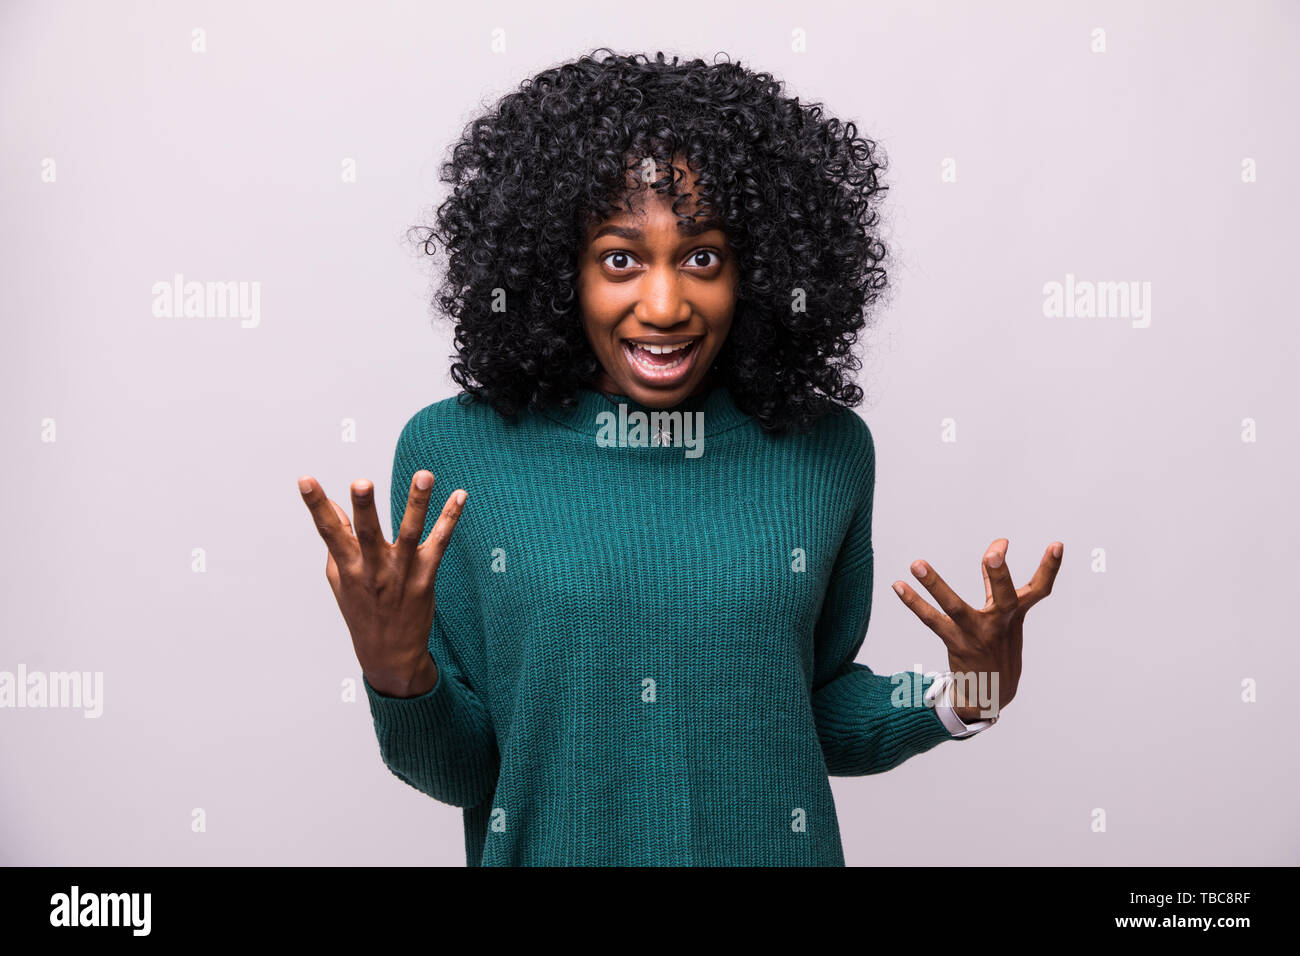 Enraged young woman with hands up yelling Stock Photo